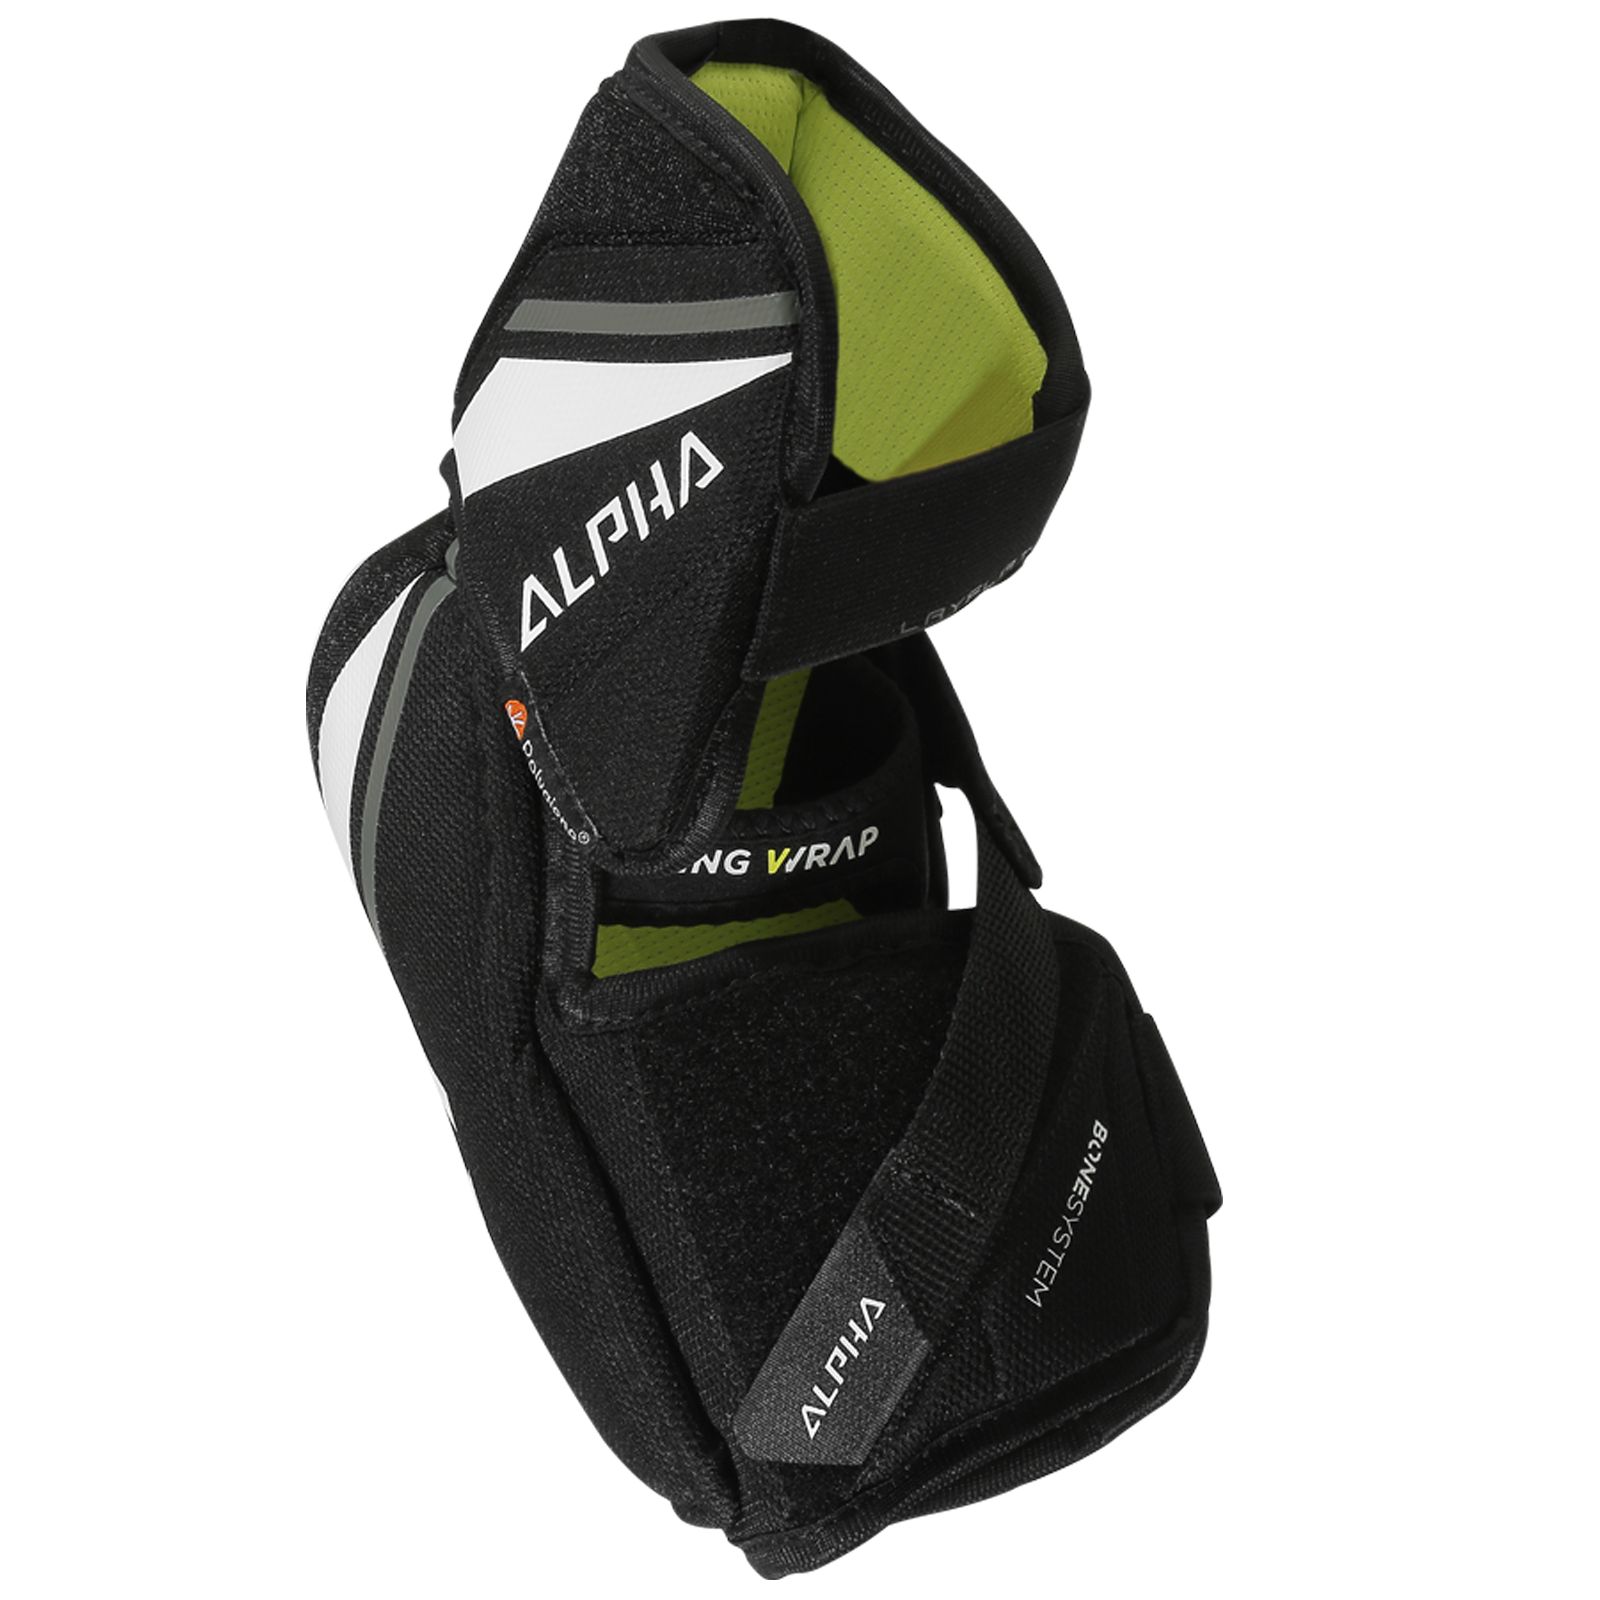 LX 20 Elbow Pad,  image number 1